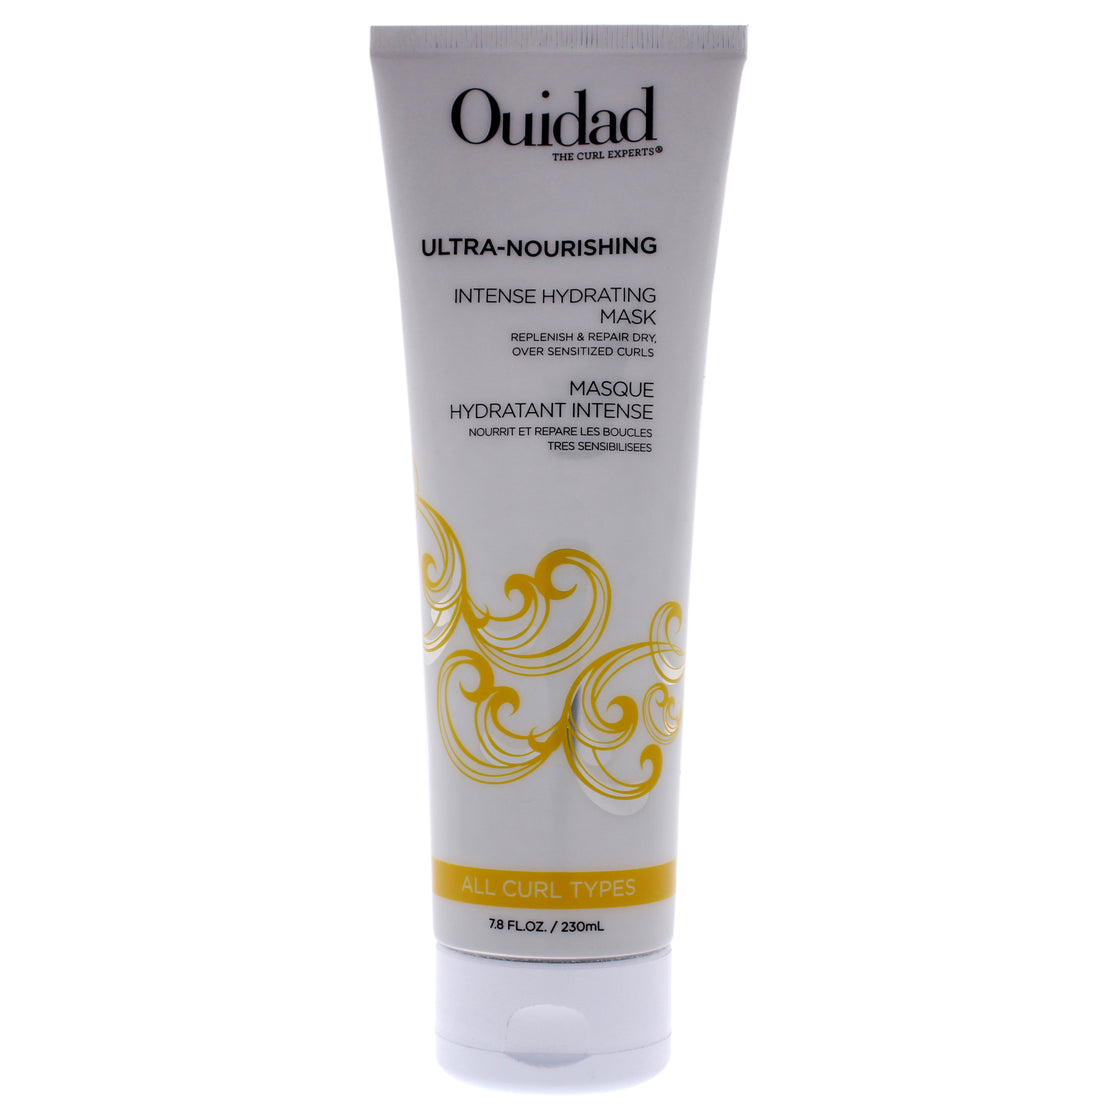 Ultra-Nourishing Intense Hydrating Mask by Ouidad for Unisex - 7.8 oz Masque